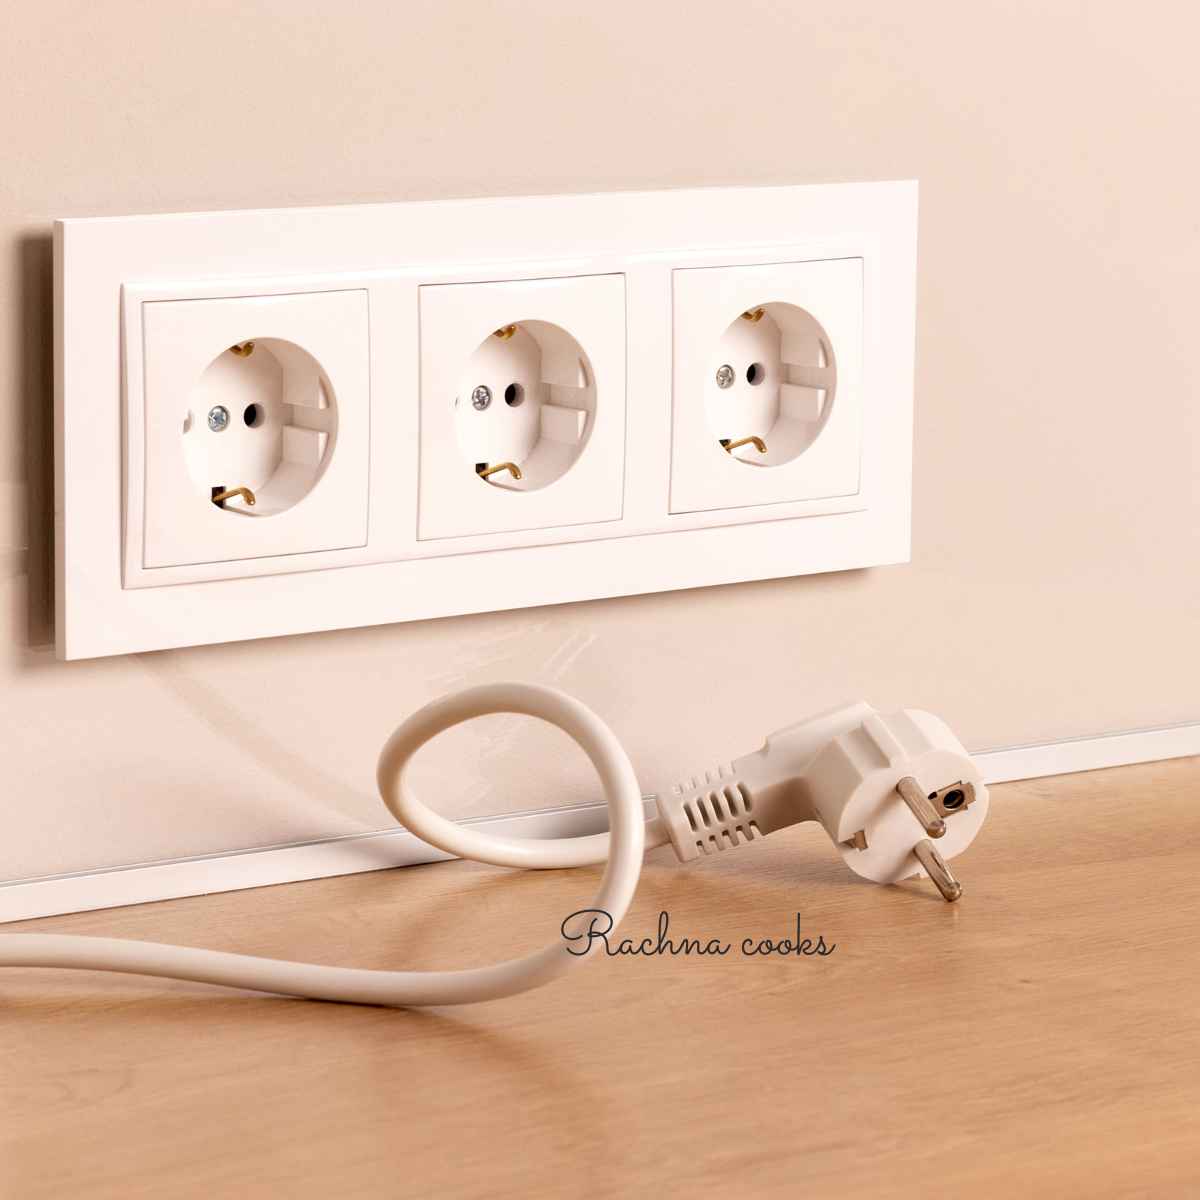 3 sockets with a plug unplugged